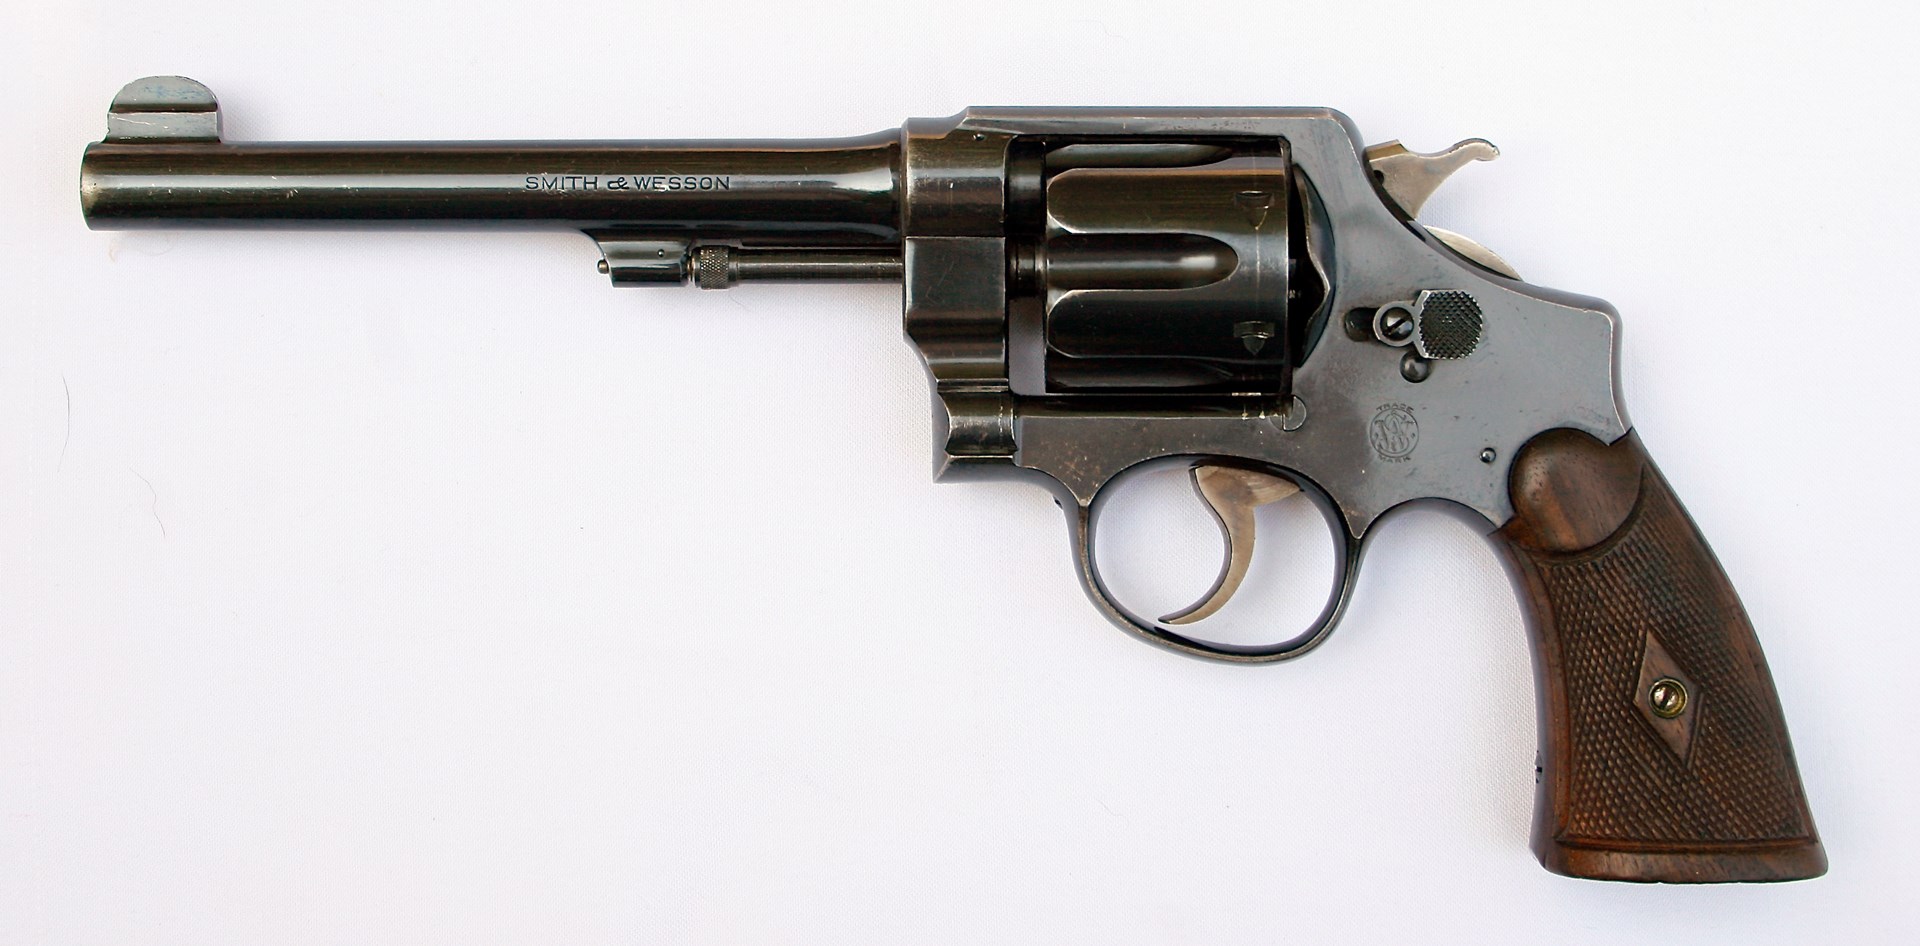 The S&W Second Model Hand Ejector eliminated the under-barrel shroud and the third lock and became the most prolific of all three .44 Hand Ejector models. This Second Model was shipped on April 27, 1929, to Neilson Radio & Sporting Goods in Phoenix, Ariz. One wonders what its purpose was in those early “Valley of the Sun” years in that portion of the still-untamed southwest.